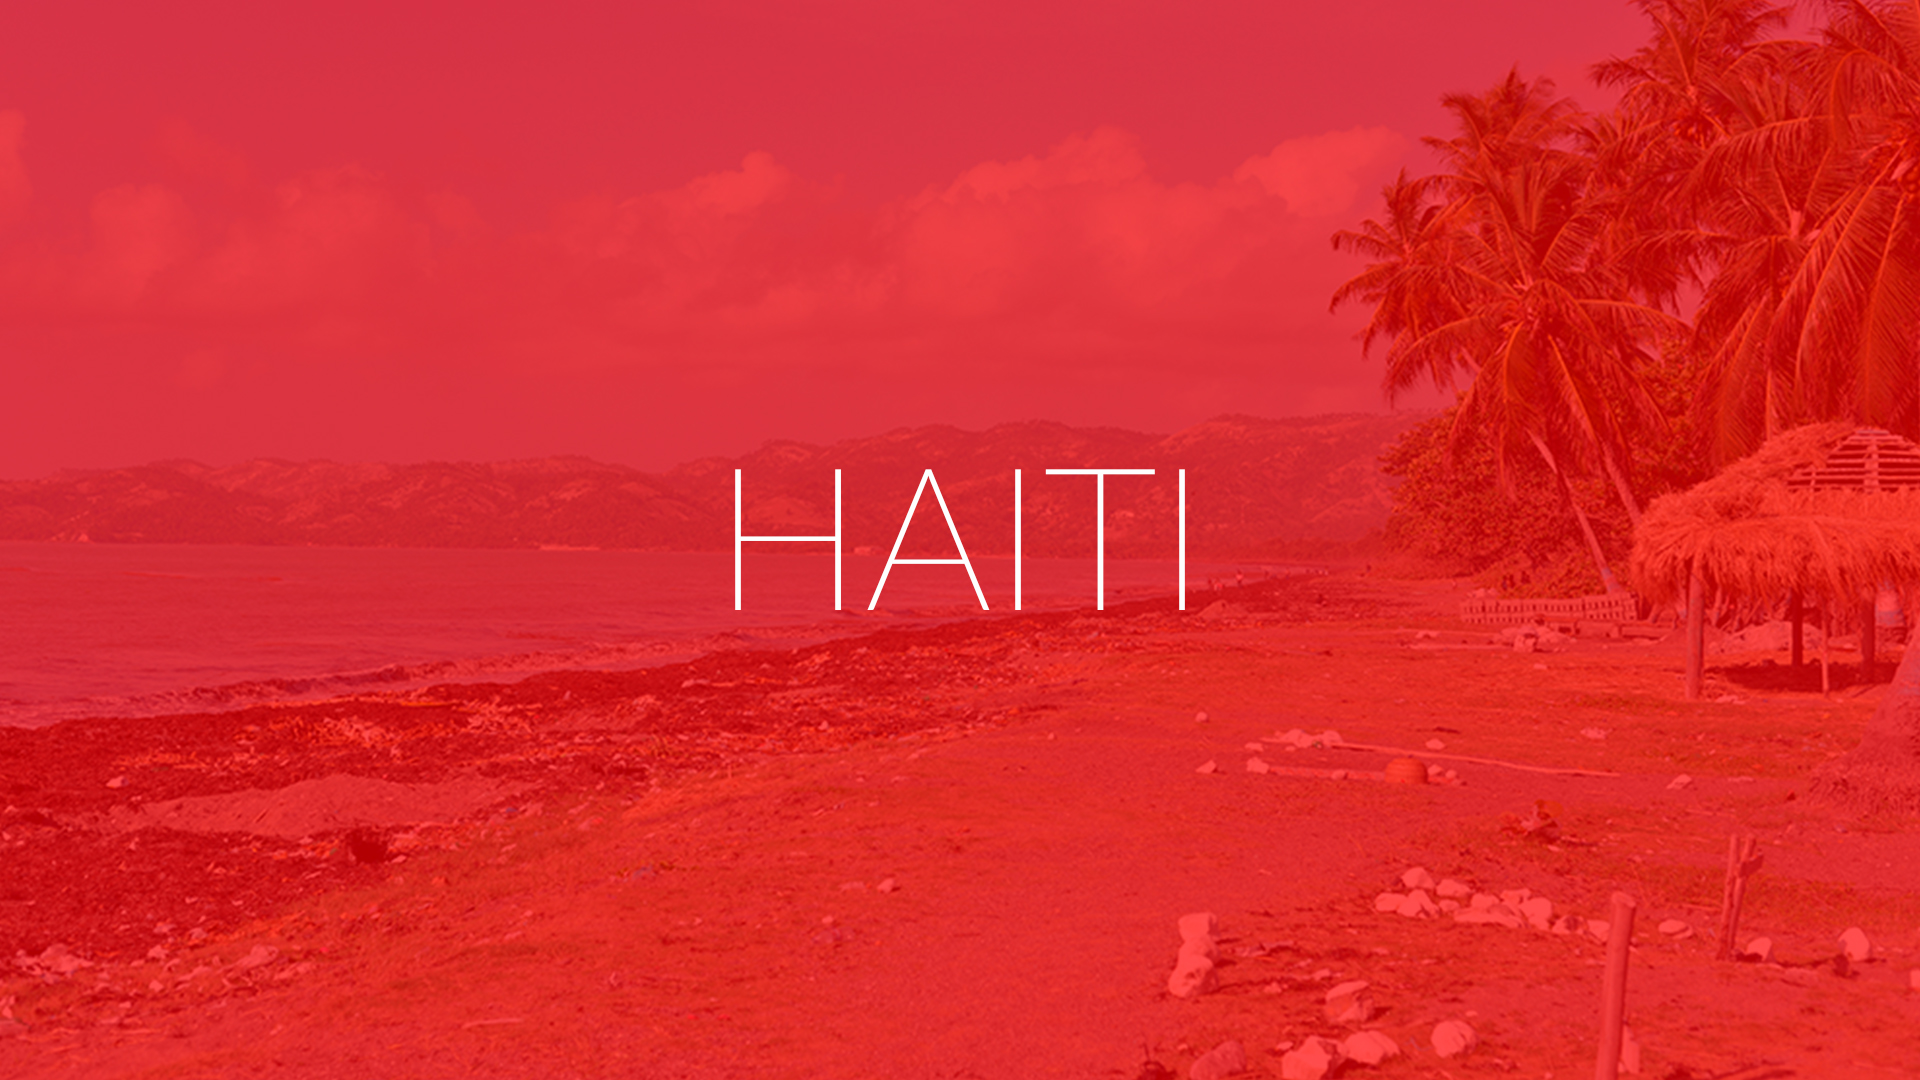 Go to Haiti with Me in 2017